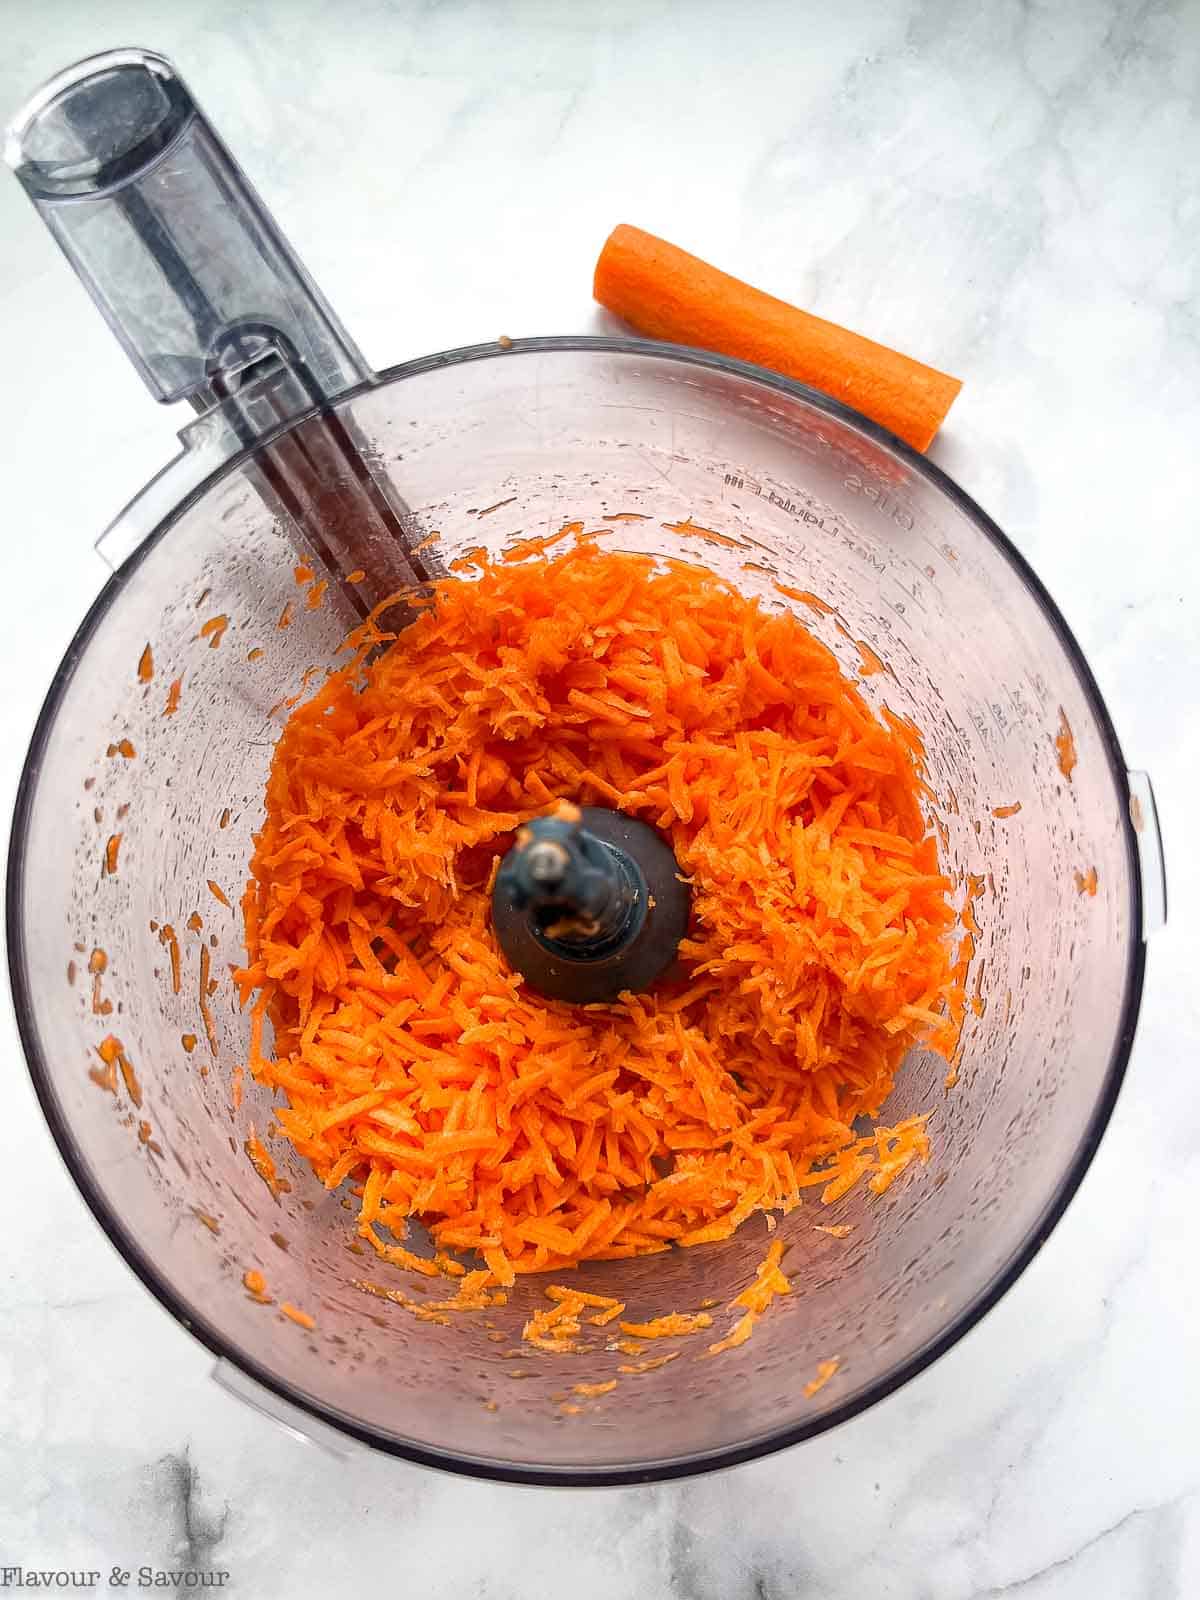 Shredded carrots in the bowl of a food processor.